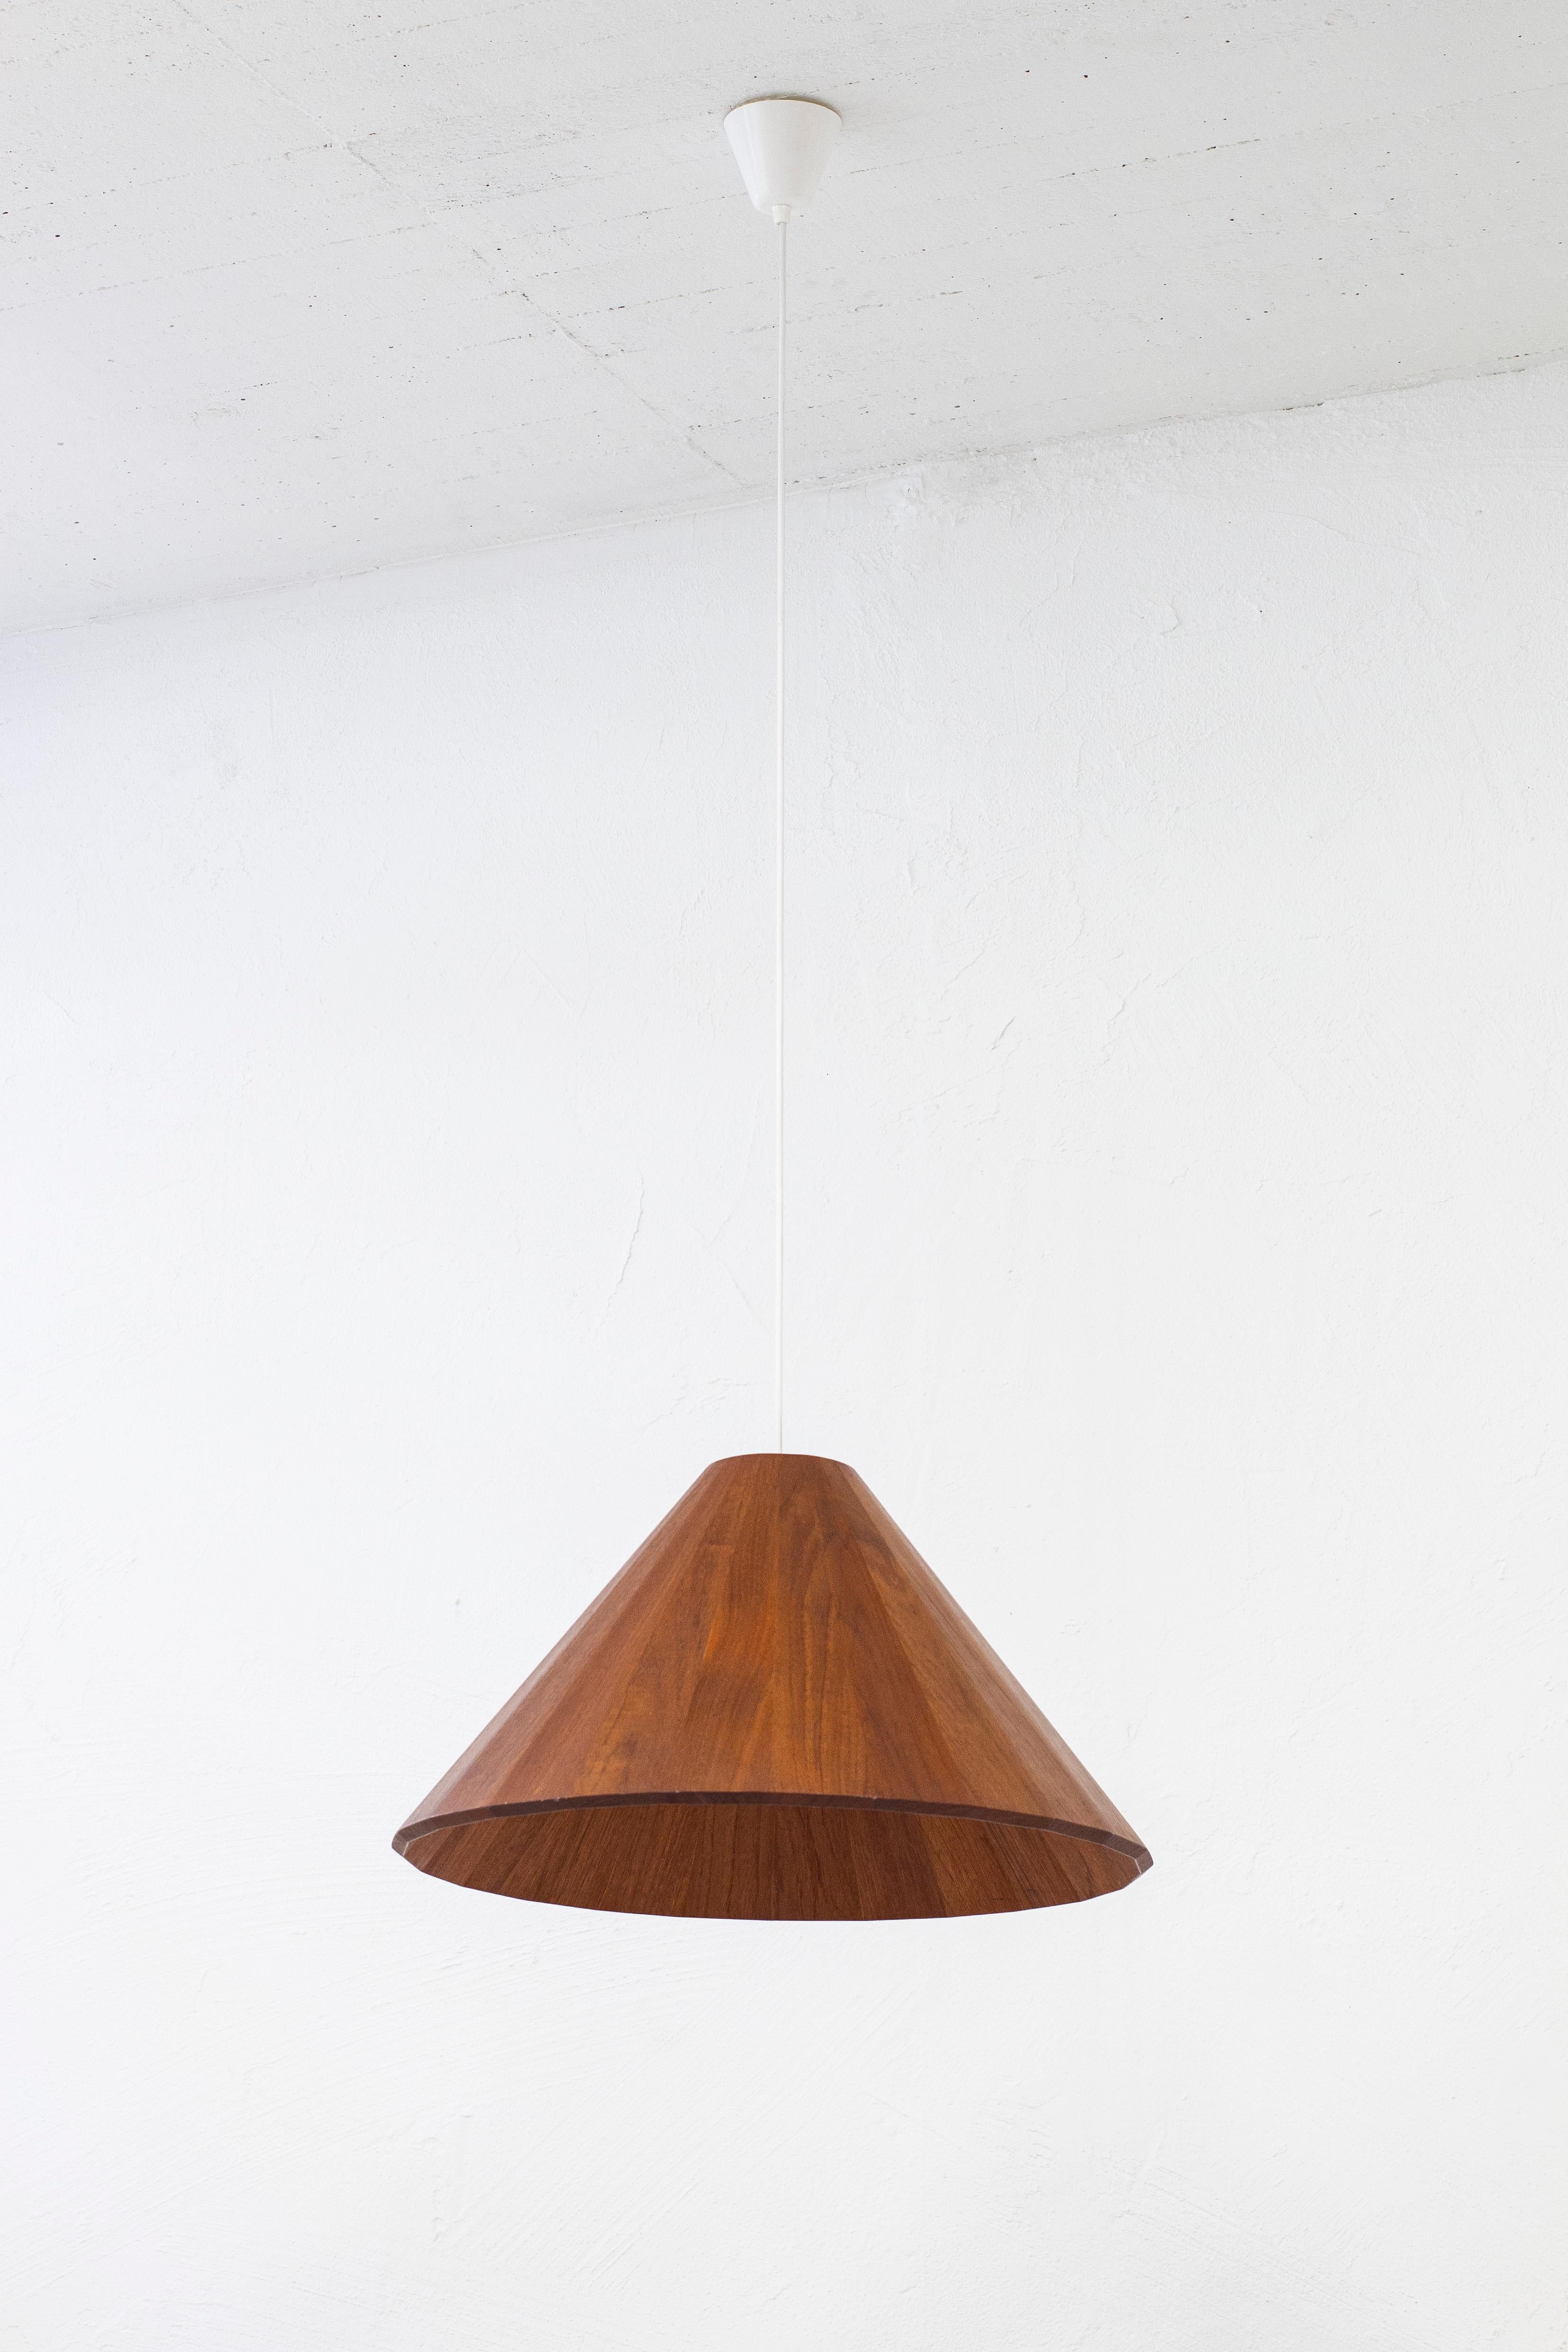 Ceiling lamp made in Denmark. Made from thick solid staved teak. Most likely made by a skilled cabinet maker and likely unique. Done somewhere around the 1950s. Custom made brass fitting and porcelain lamp fitment. Very good vintage condition with